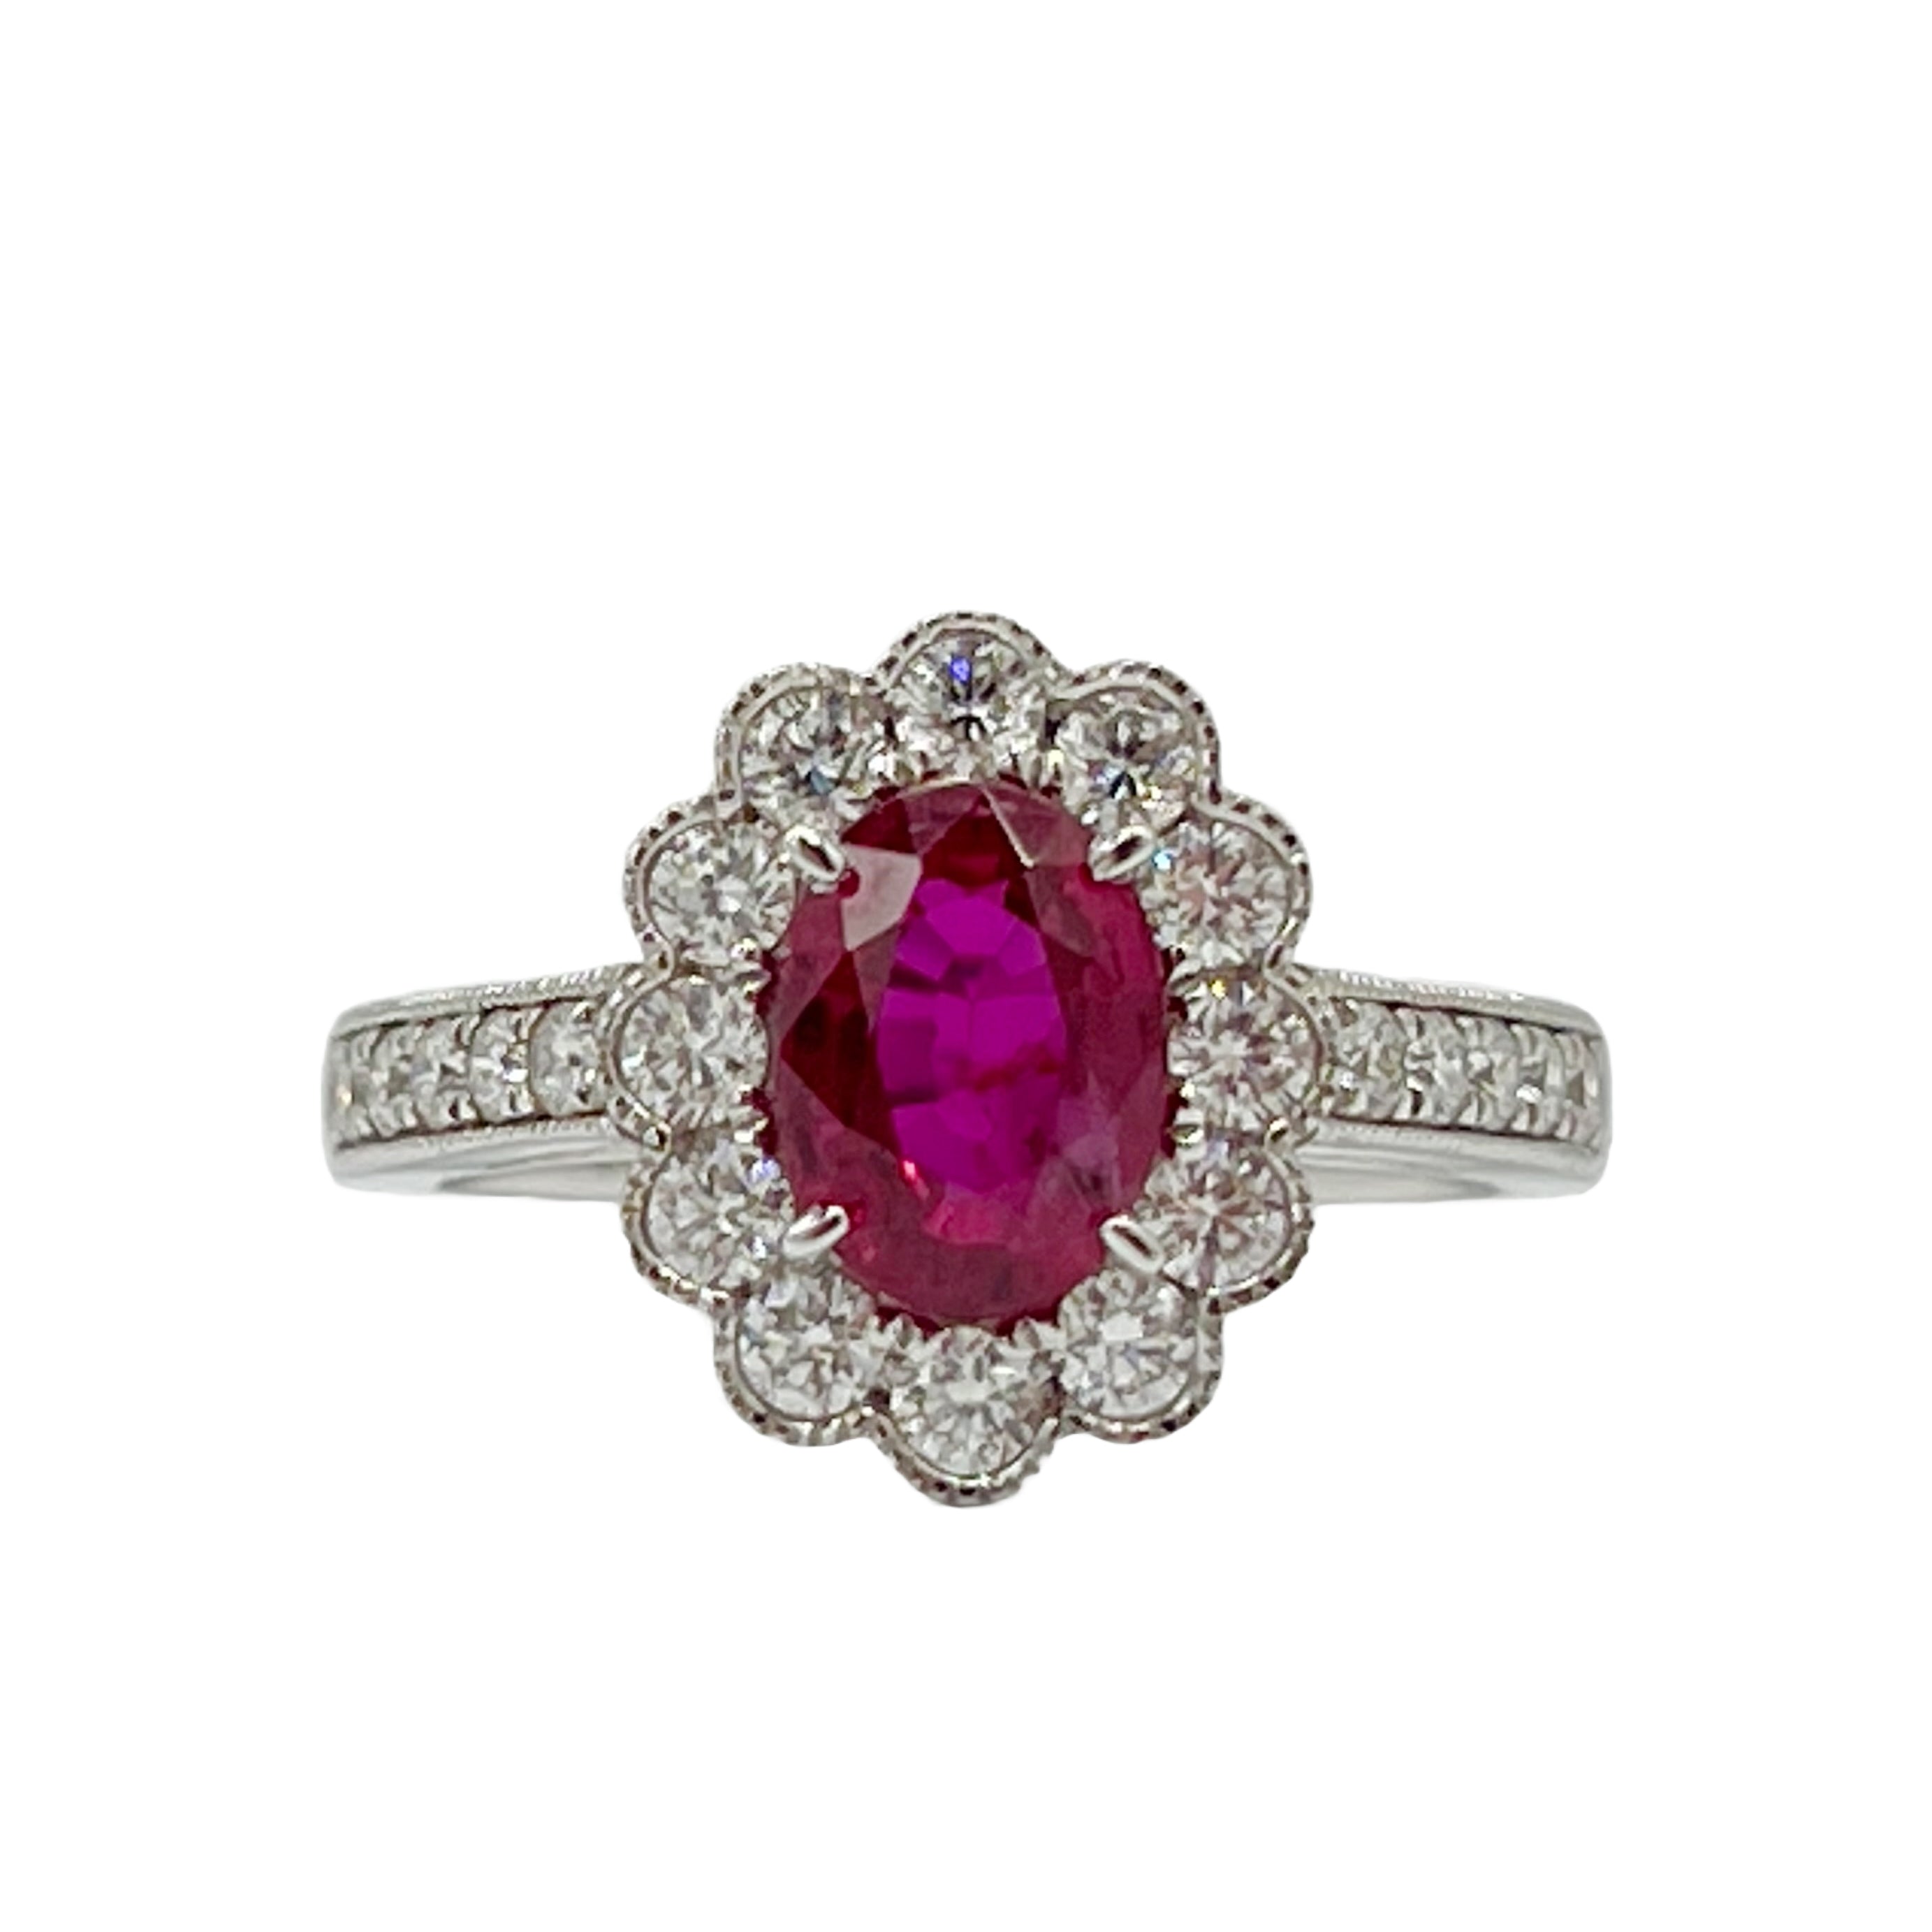 Ring 18KW/3.3G 1RUBY-1.73CT 22RD-0.71CT